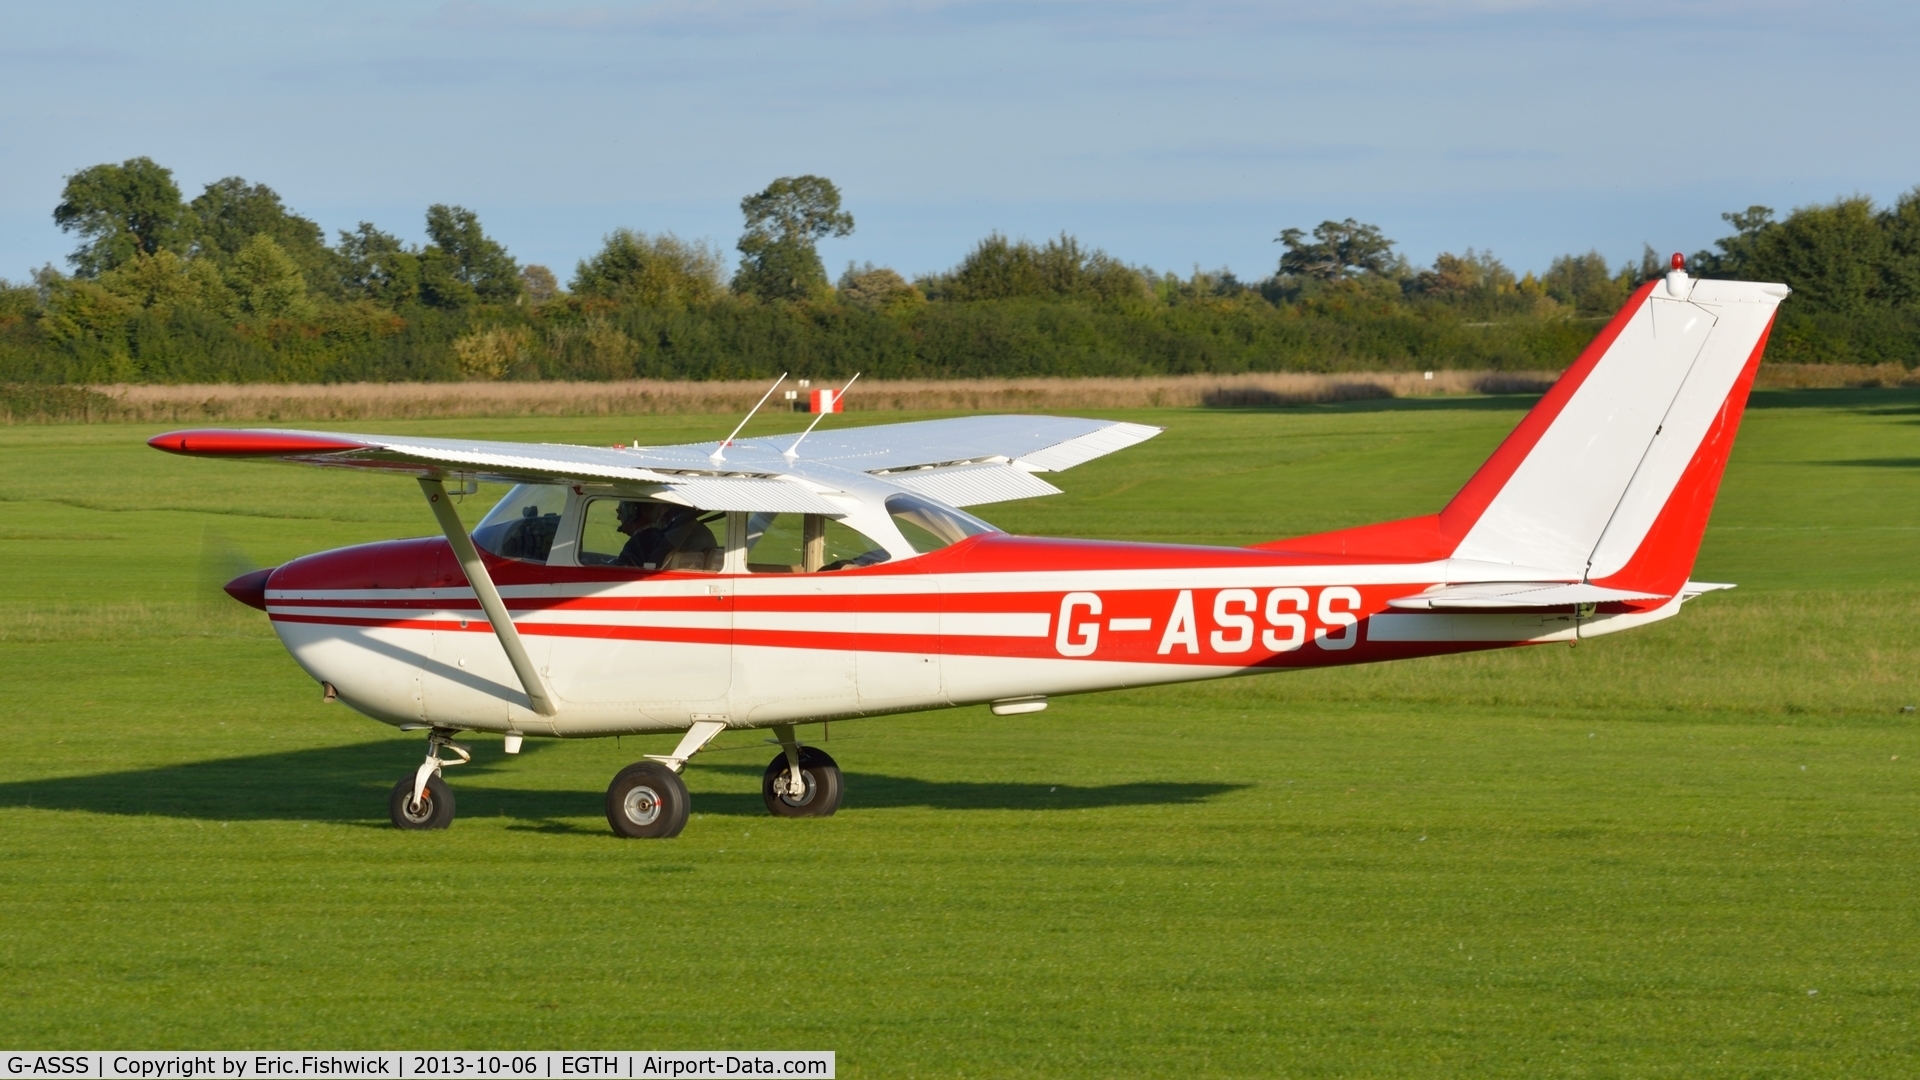 G-ASSS, 1964 Cessna 172E C/N 172-51467, 1. G-ASSS preparing to depart The Shuttleworth Collection October Flying Day - (The final Flying Day of their 50th Anniversary Season.)